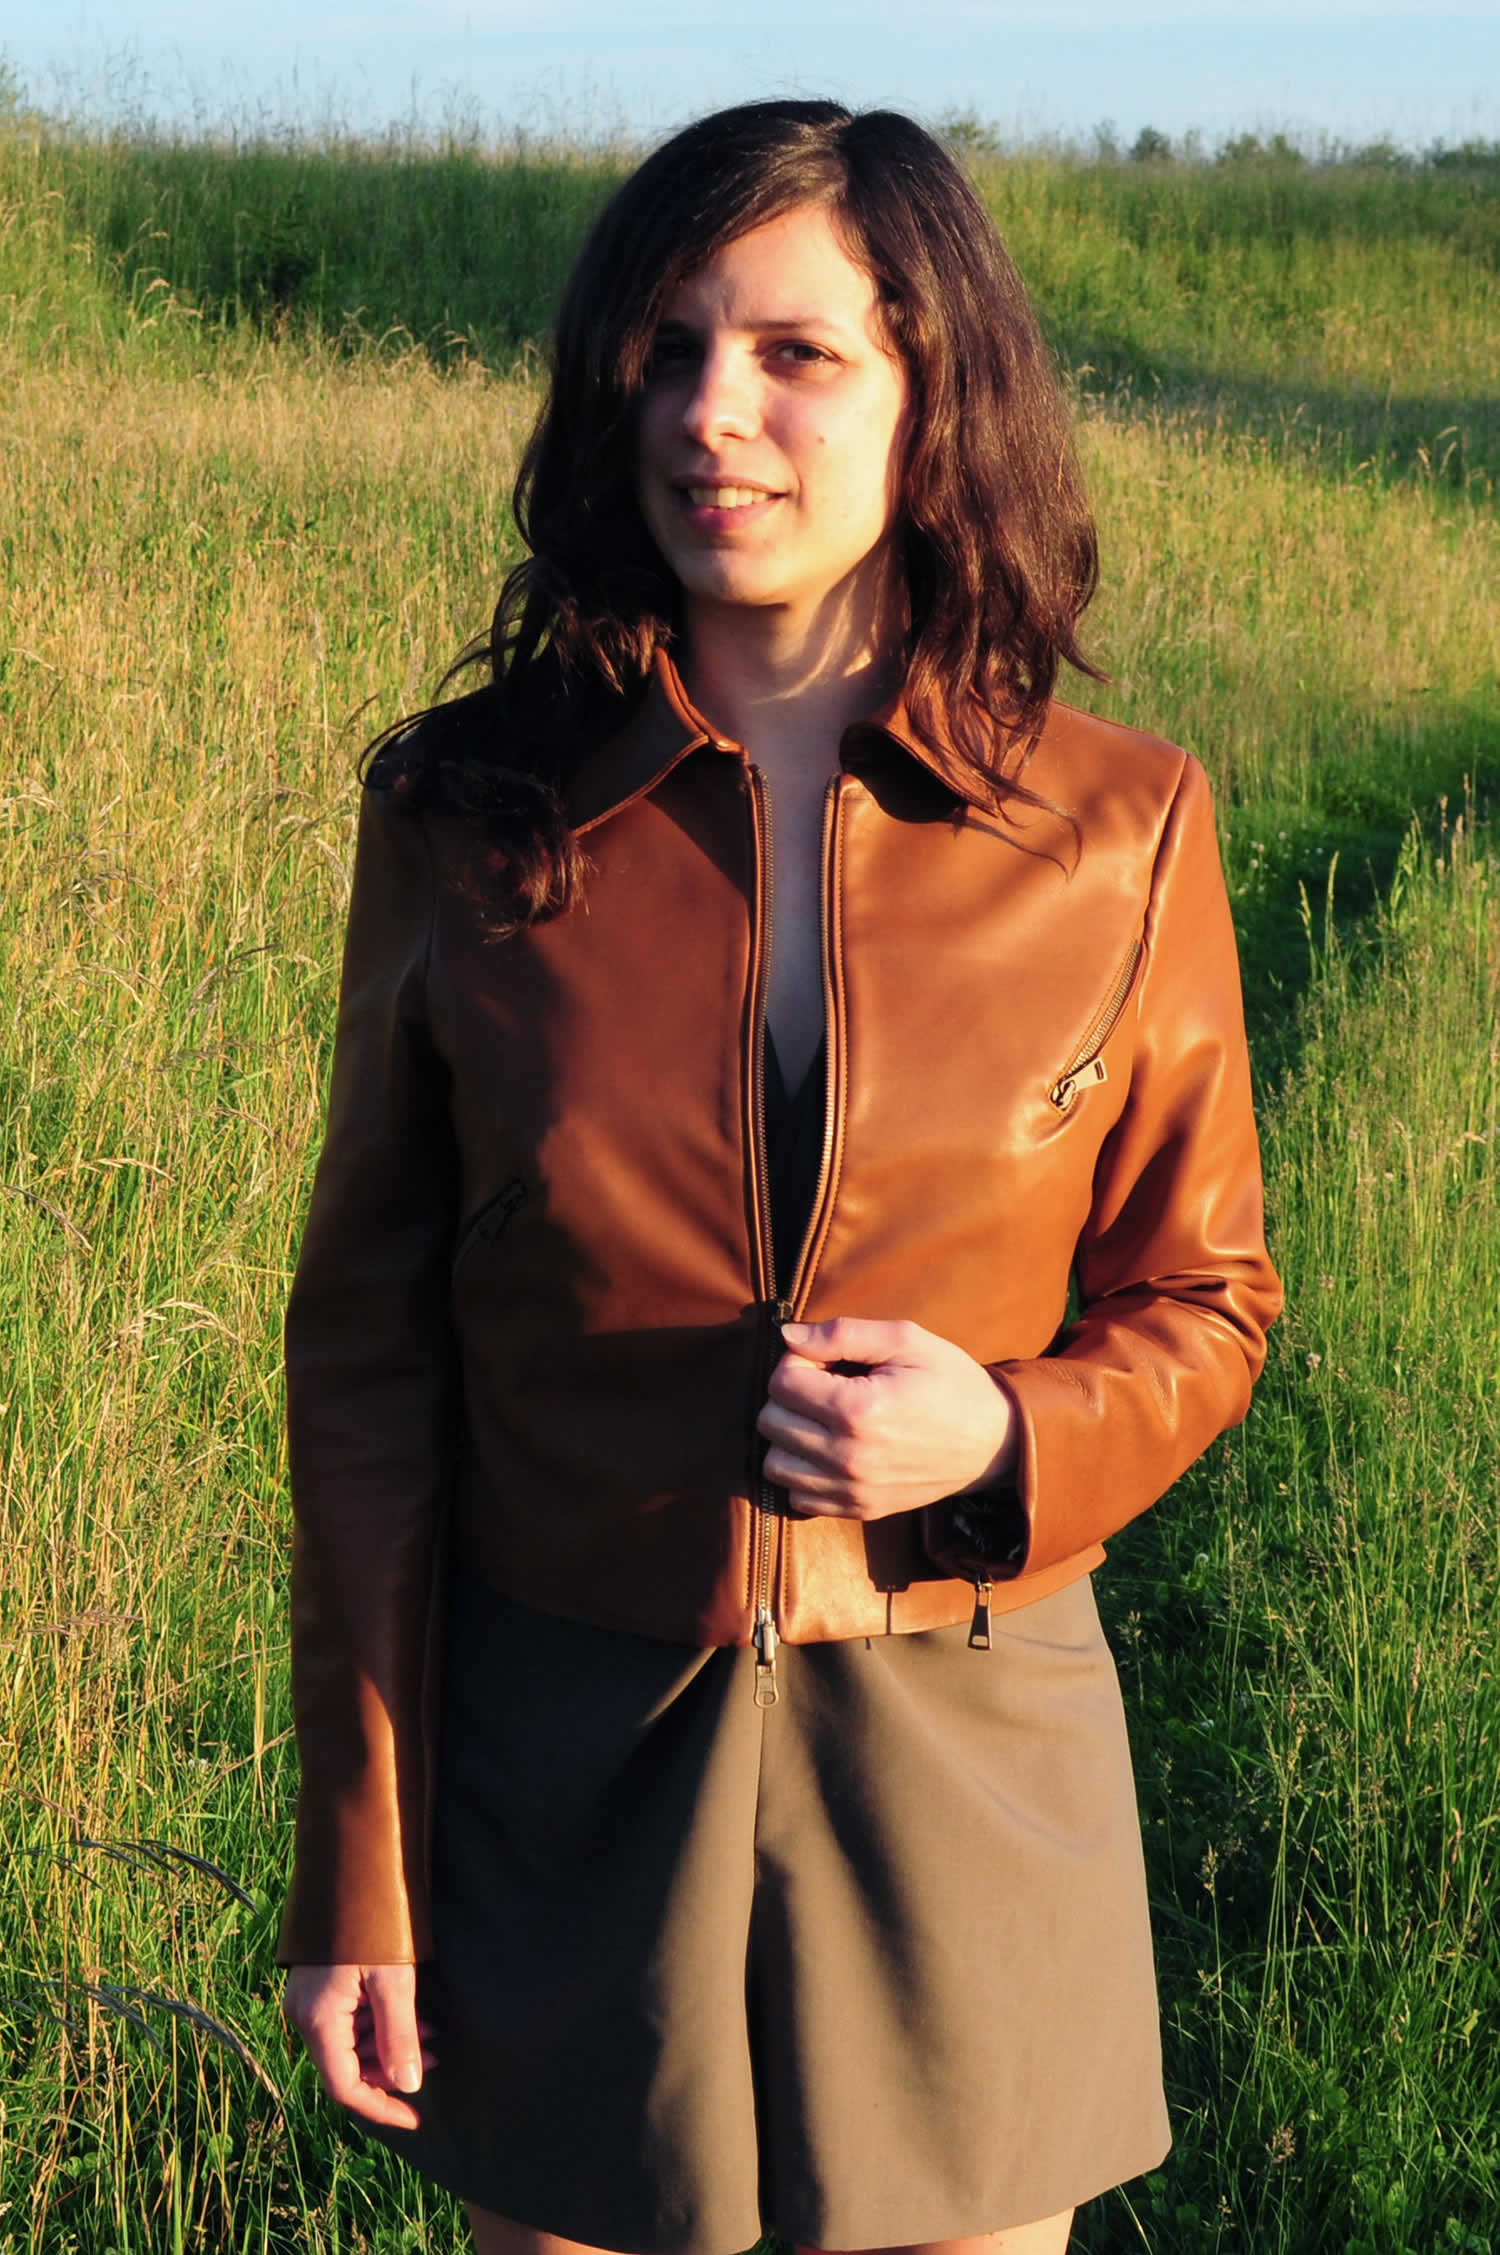 ladulsatina Sewing and DIY fashion blog: leather jacket and playsuit - jacket detail